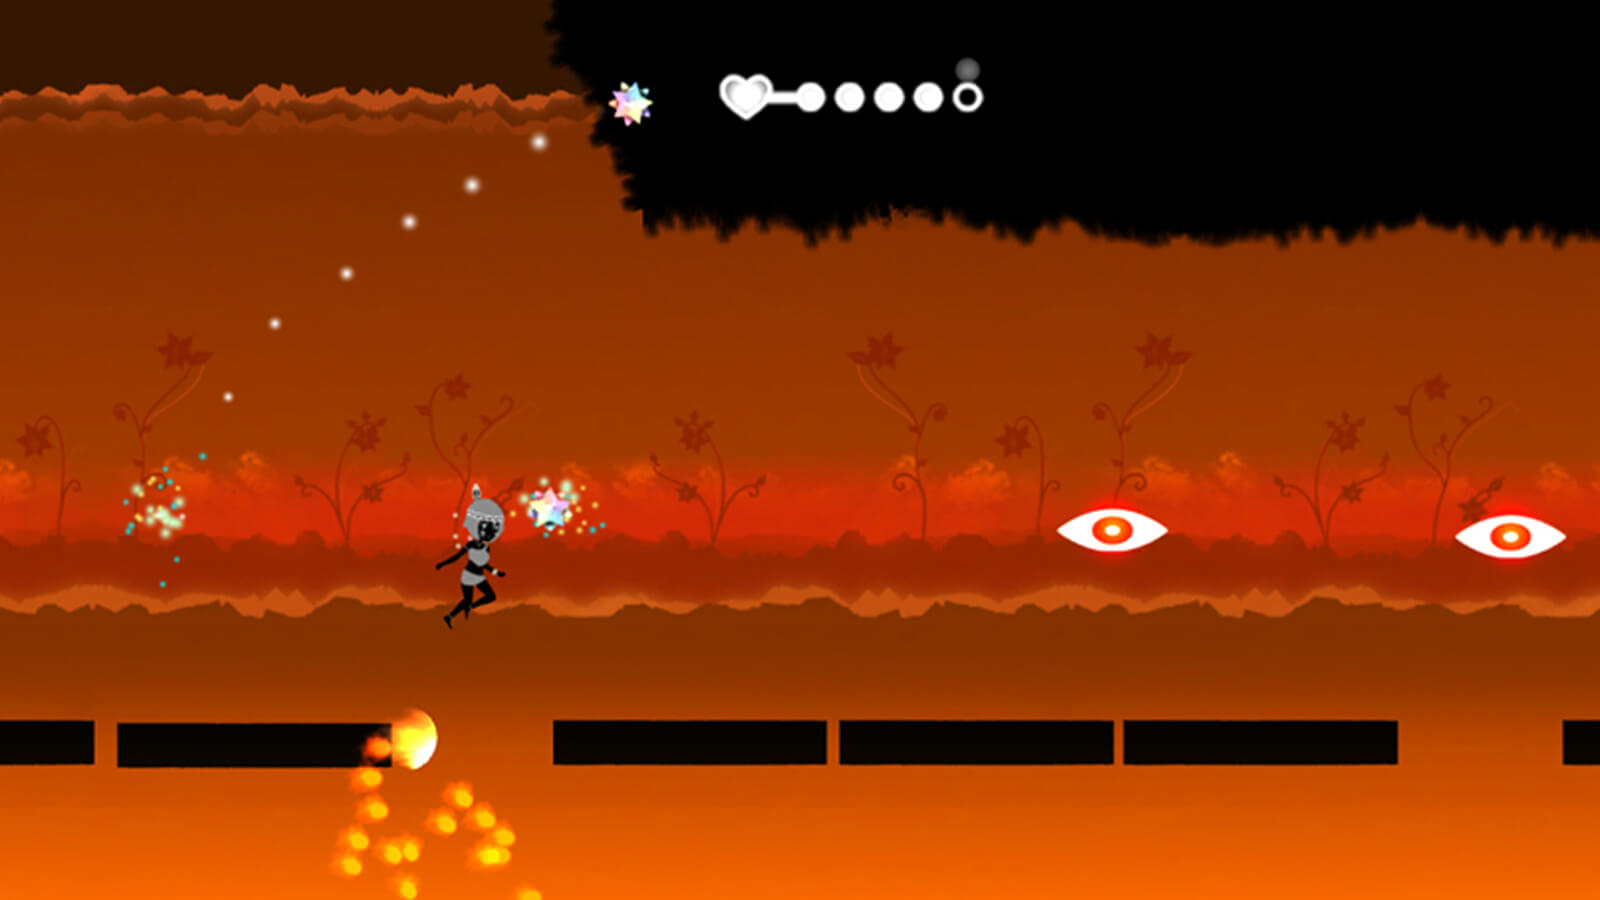 The player's character jumps from platform to platform as fire leaps up from below. Two glowing eyes float middair ahead.